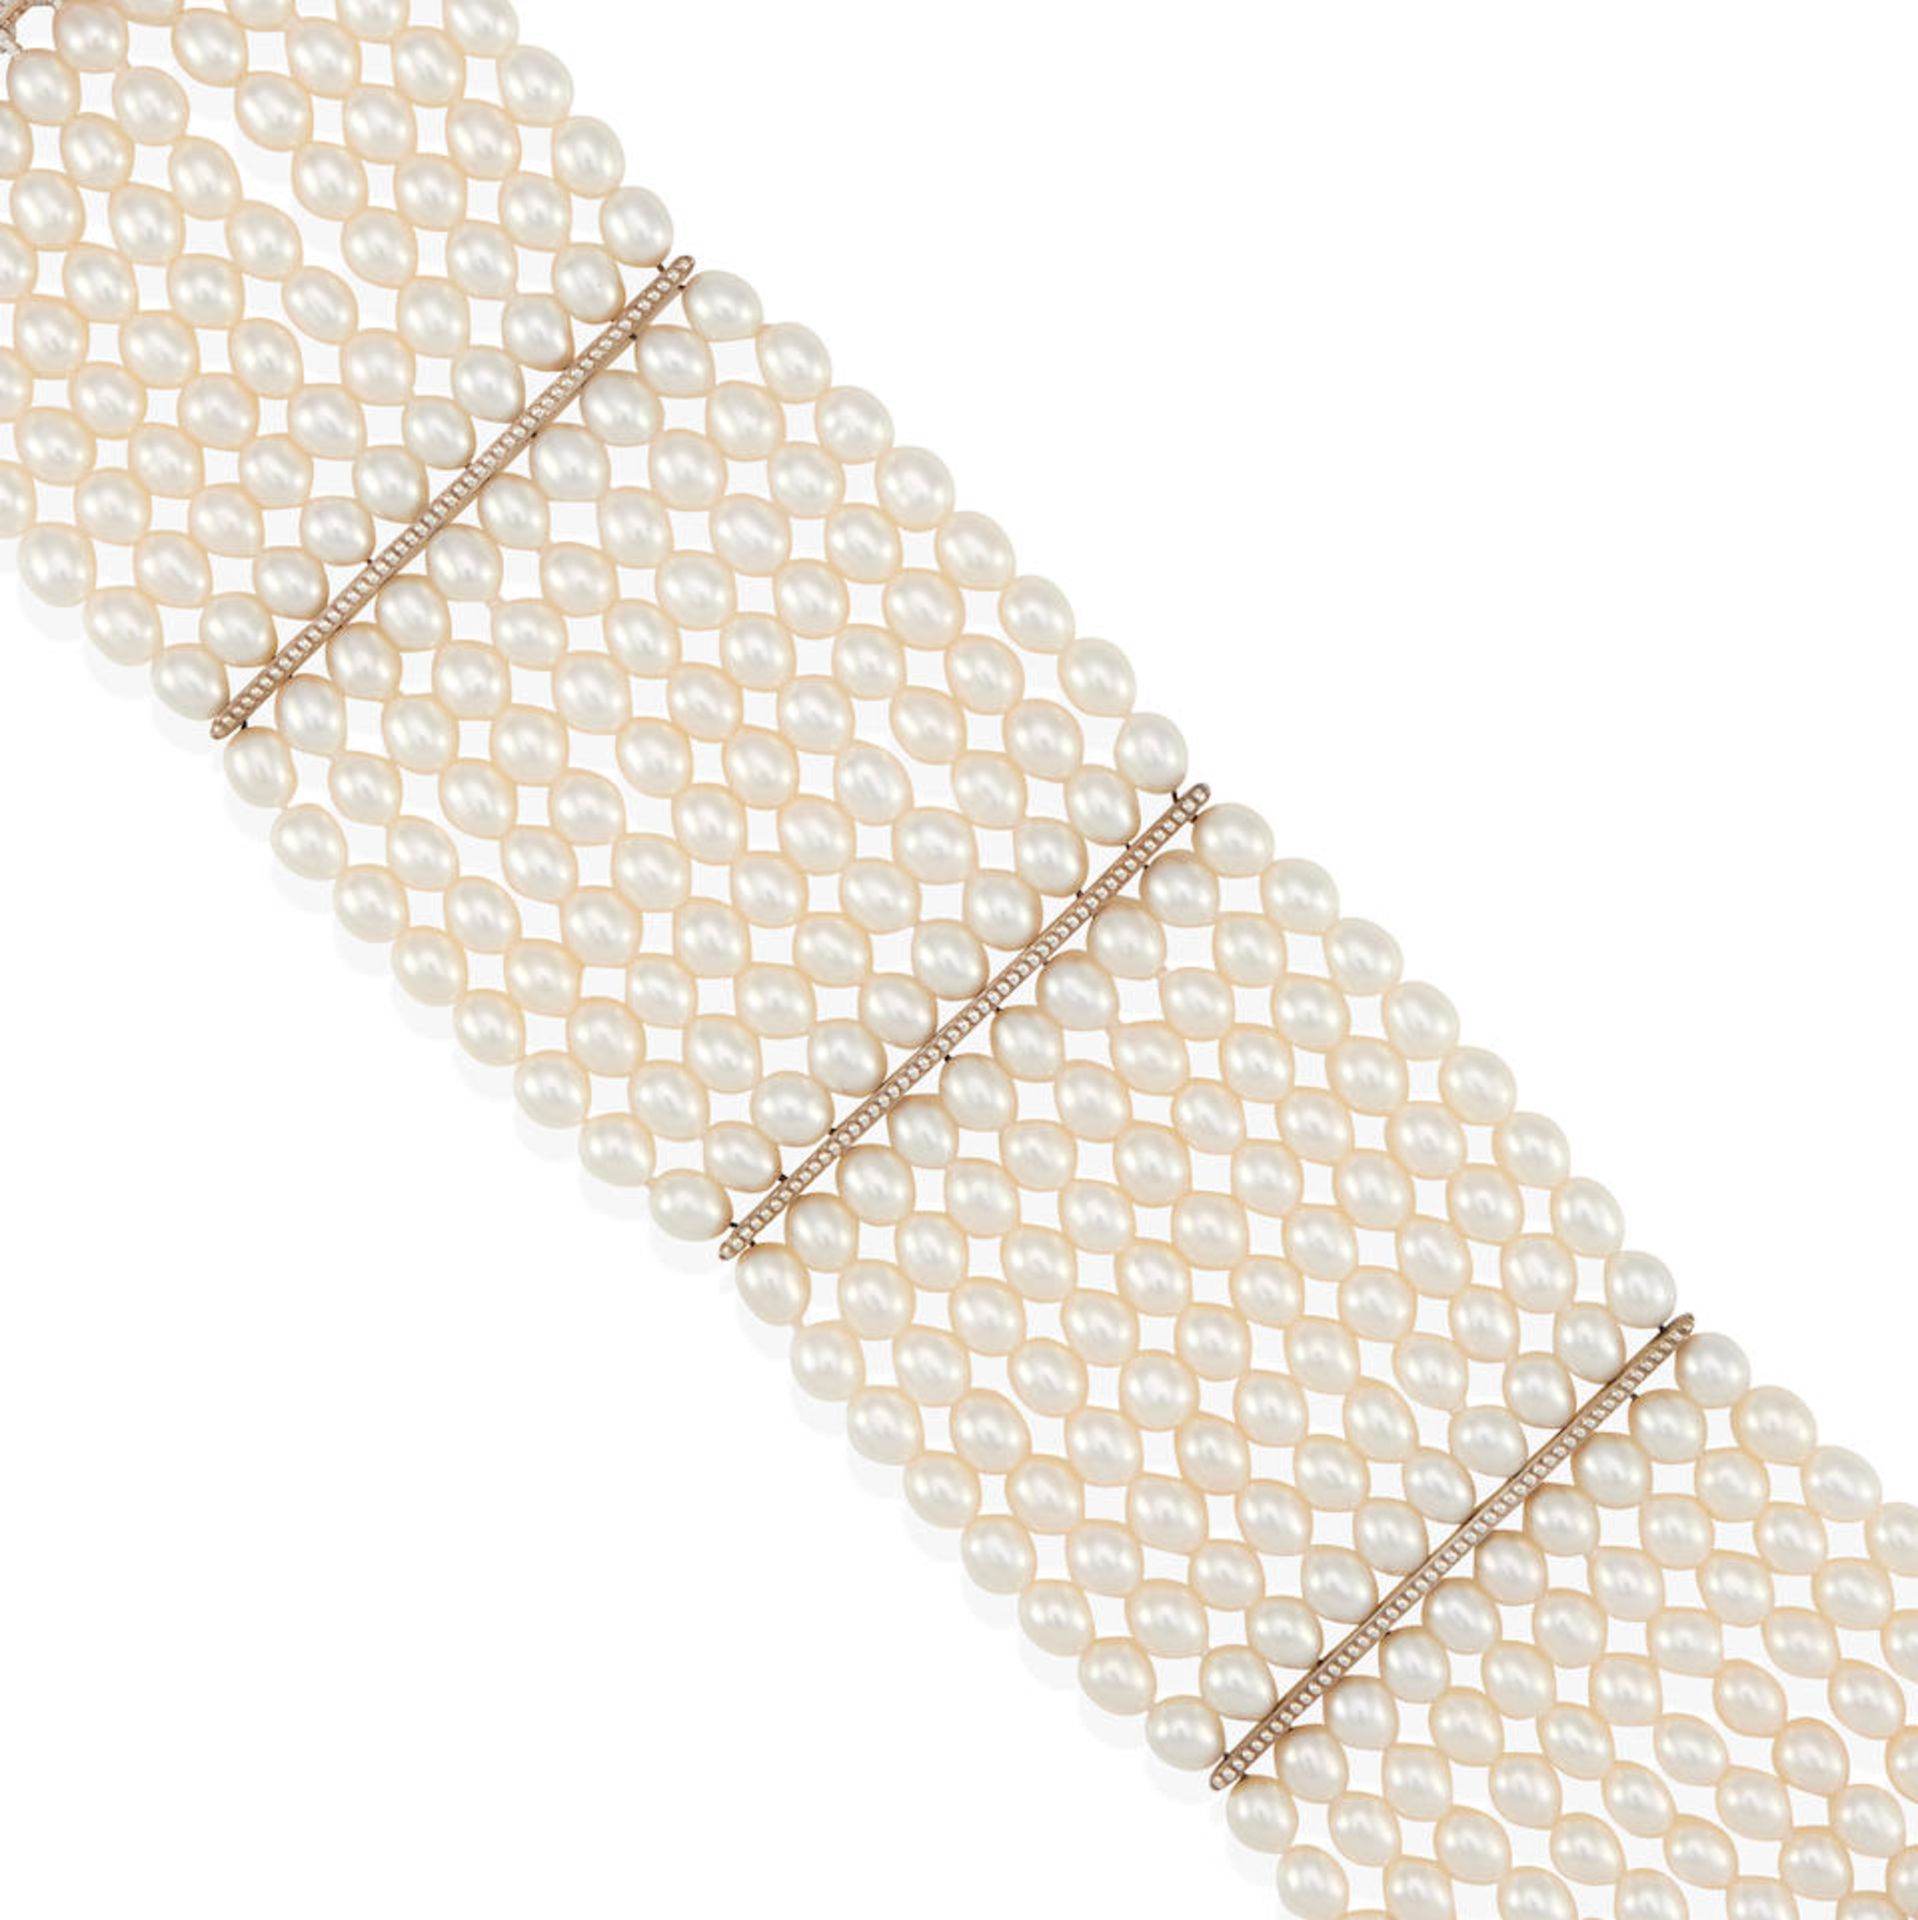 TIFFANY & CO.: A SILVER AND FRESHWATER CULTURED PEARL MULTI-STRAND BRACELET